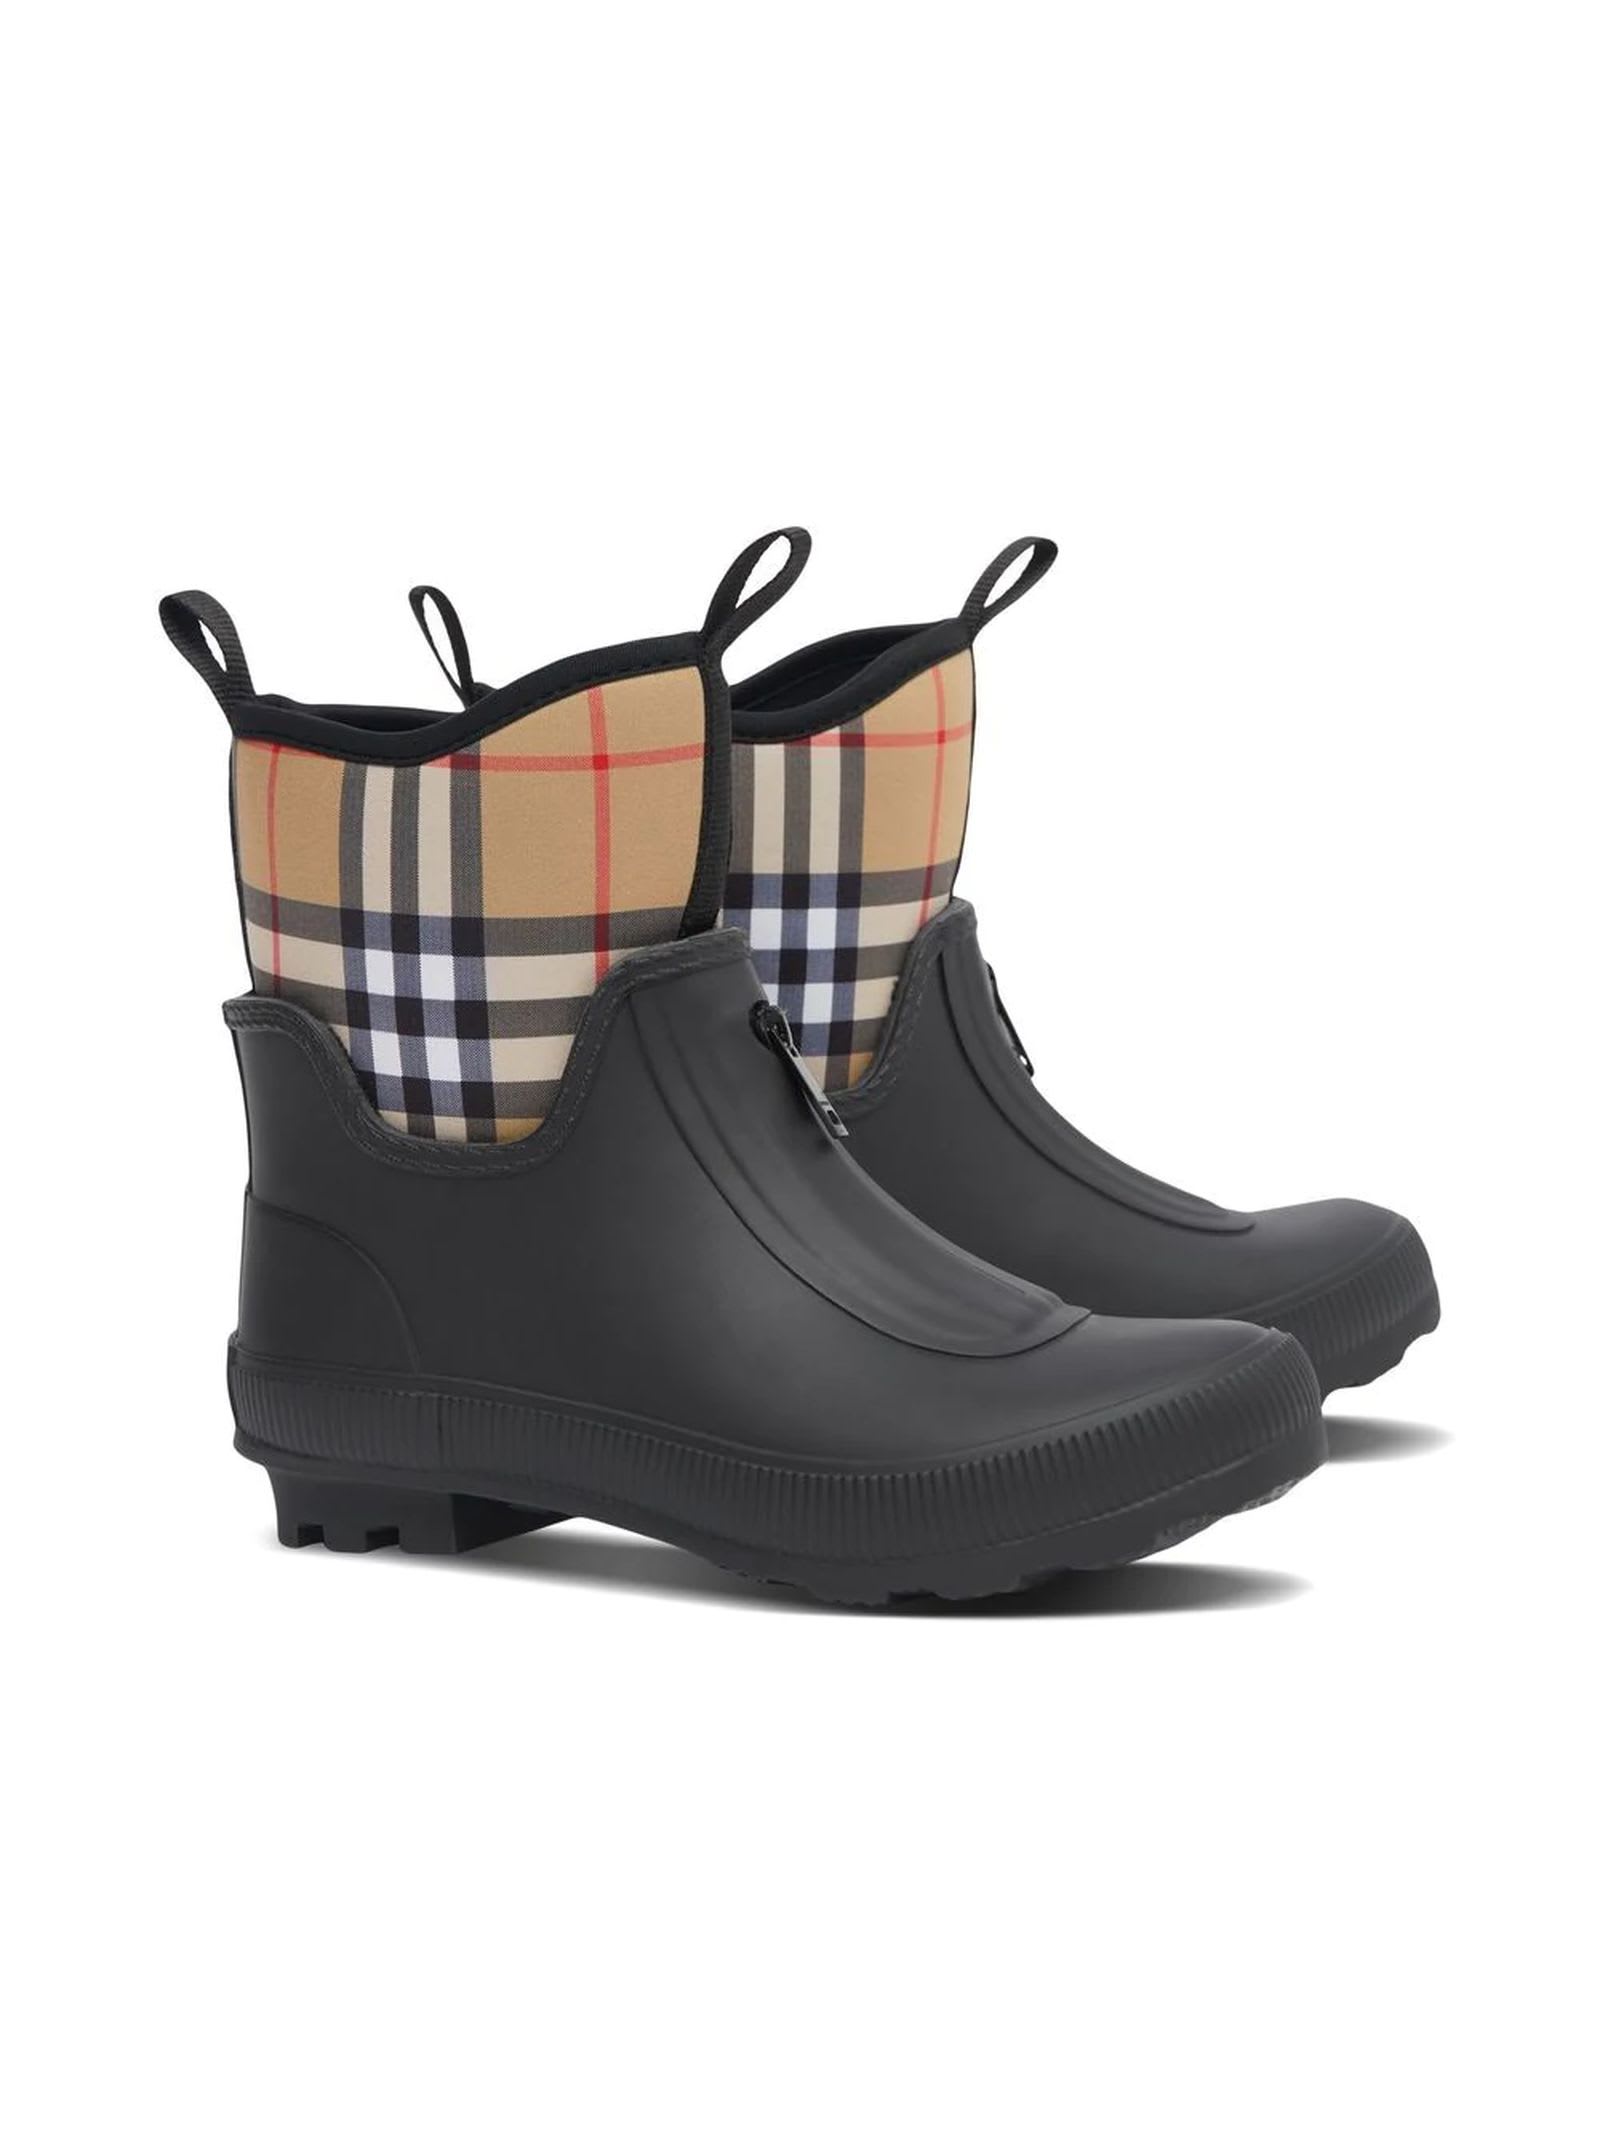 Burberry Black Rubber Boots